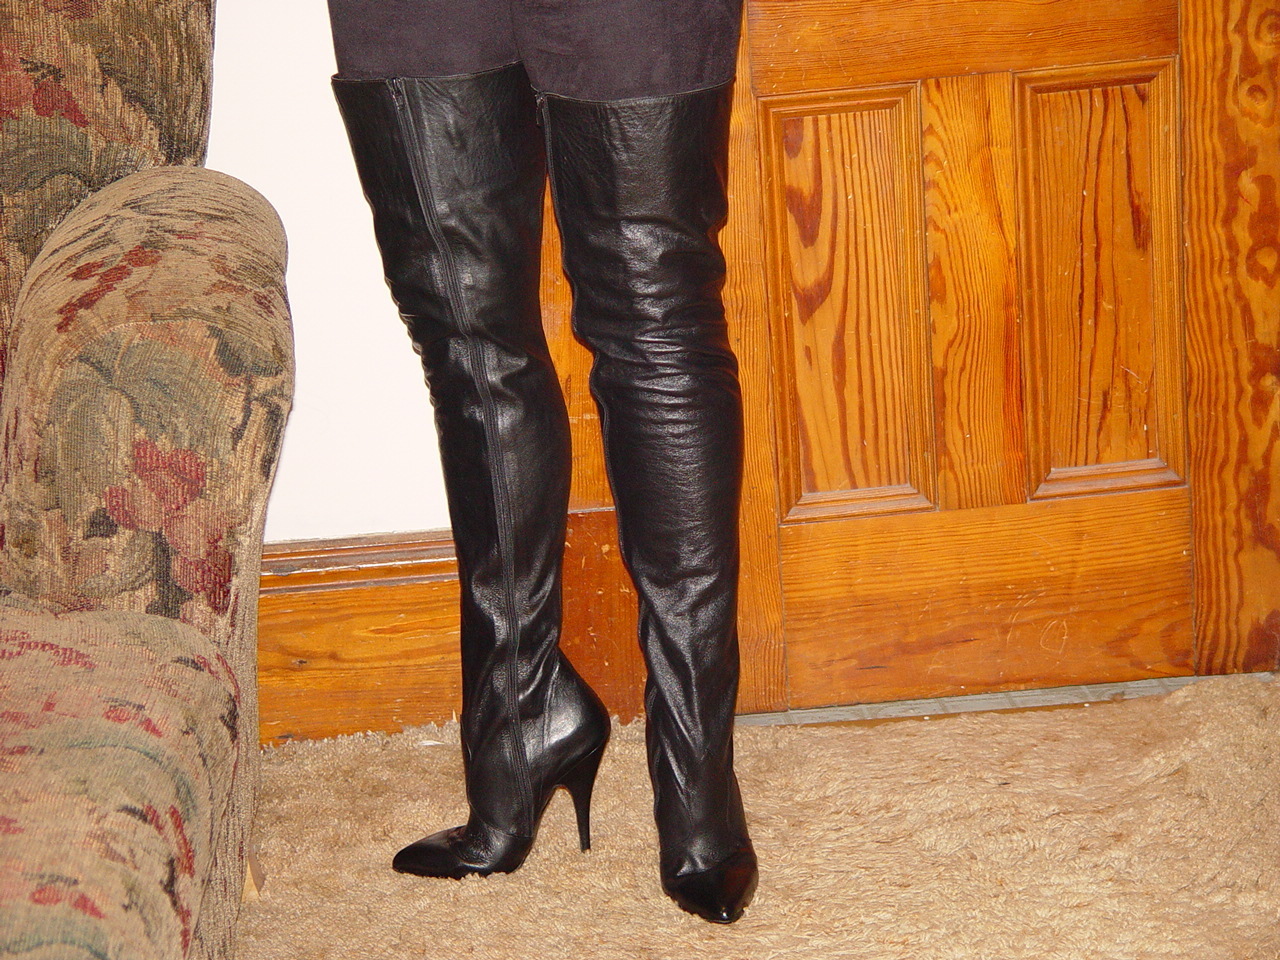 eBay Leather: Vintage 1980s black leather thigh boots sell well